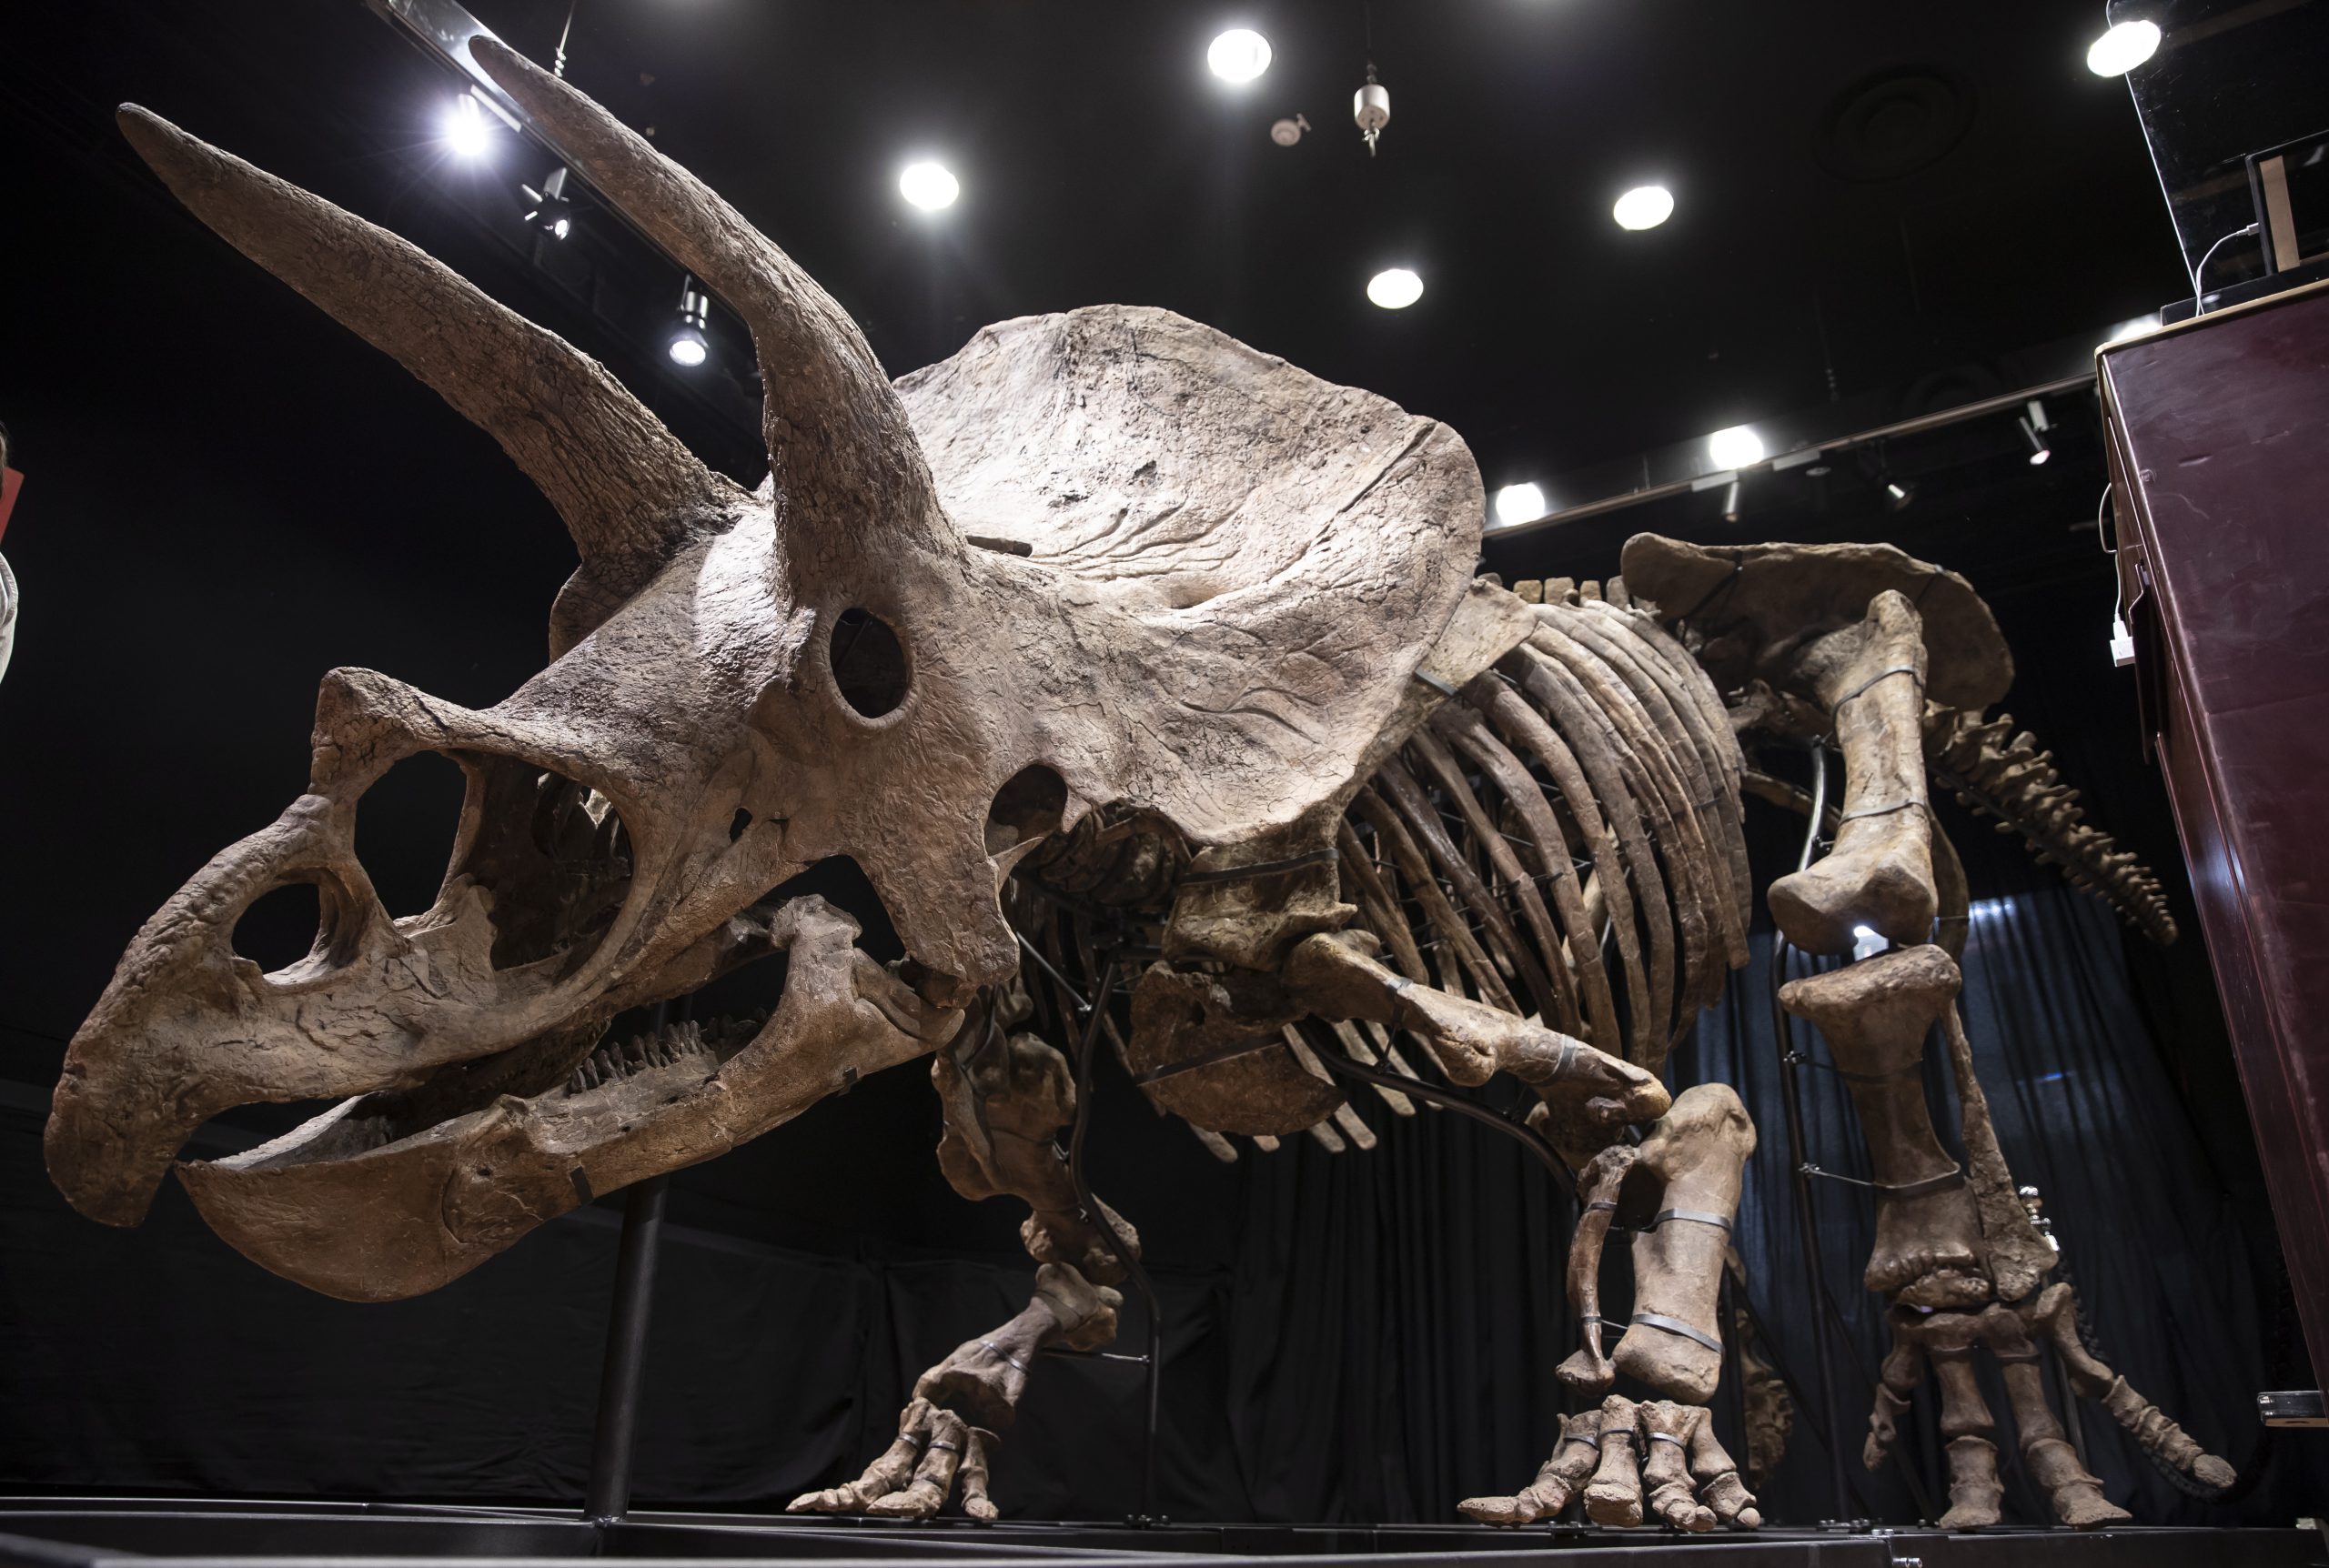 epa09536401 General view of the skeleton of a fossilized Triceratops dinosaur at the Drouot auction house in Paris, France, 21 October 2021. The skeleton of a Triceratops, an over 66 million years old dinosaur, knicknamed 'Big John', has sold at auction at the Drouot Auction House, fetching a total of 5.5 million euros.  EPA/IAN LANGSDON